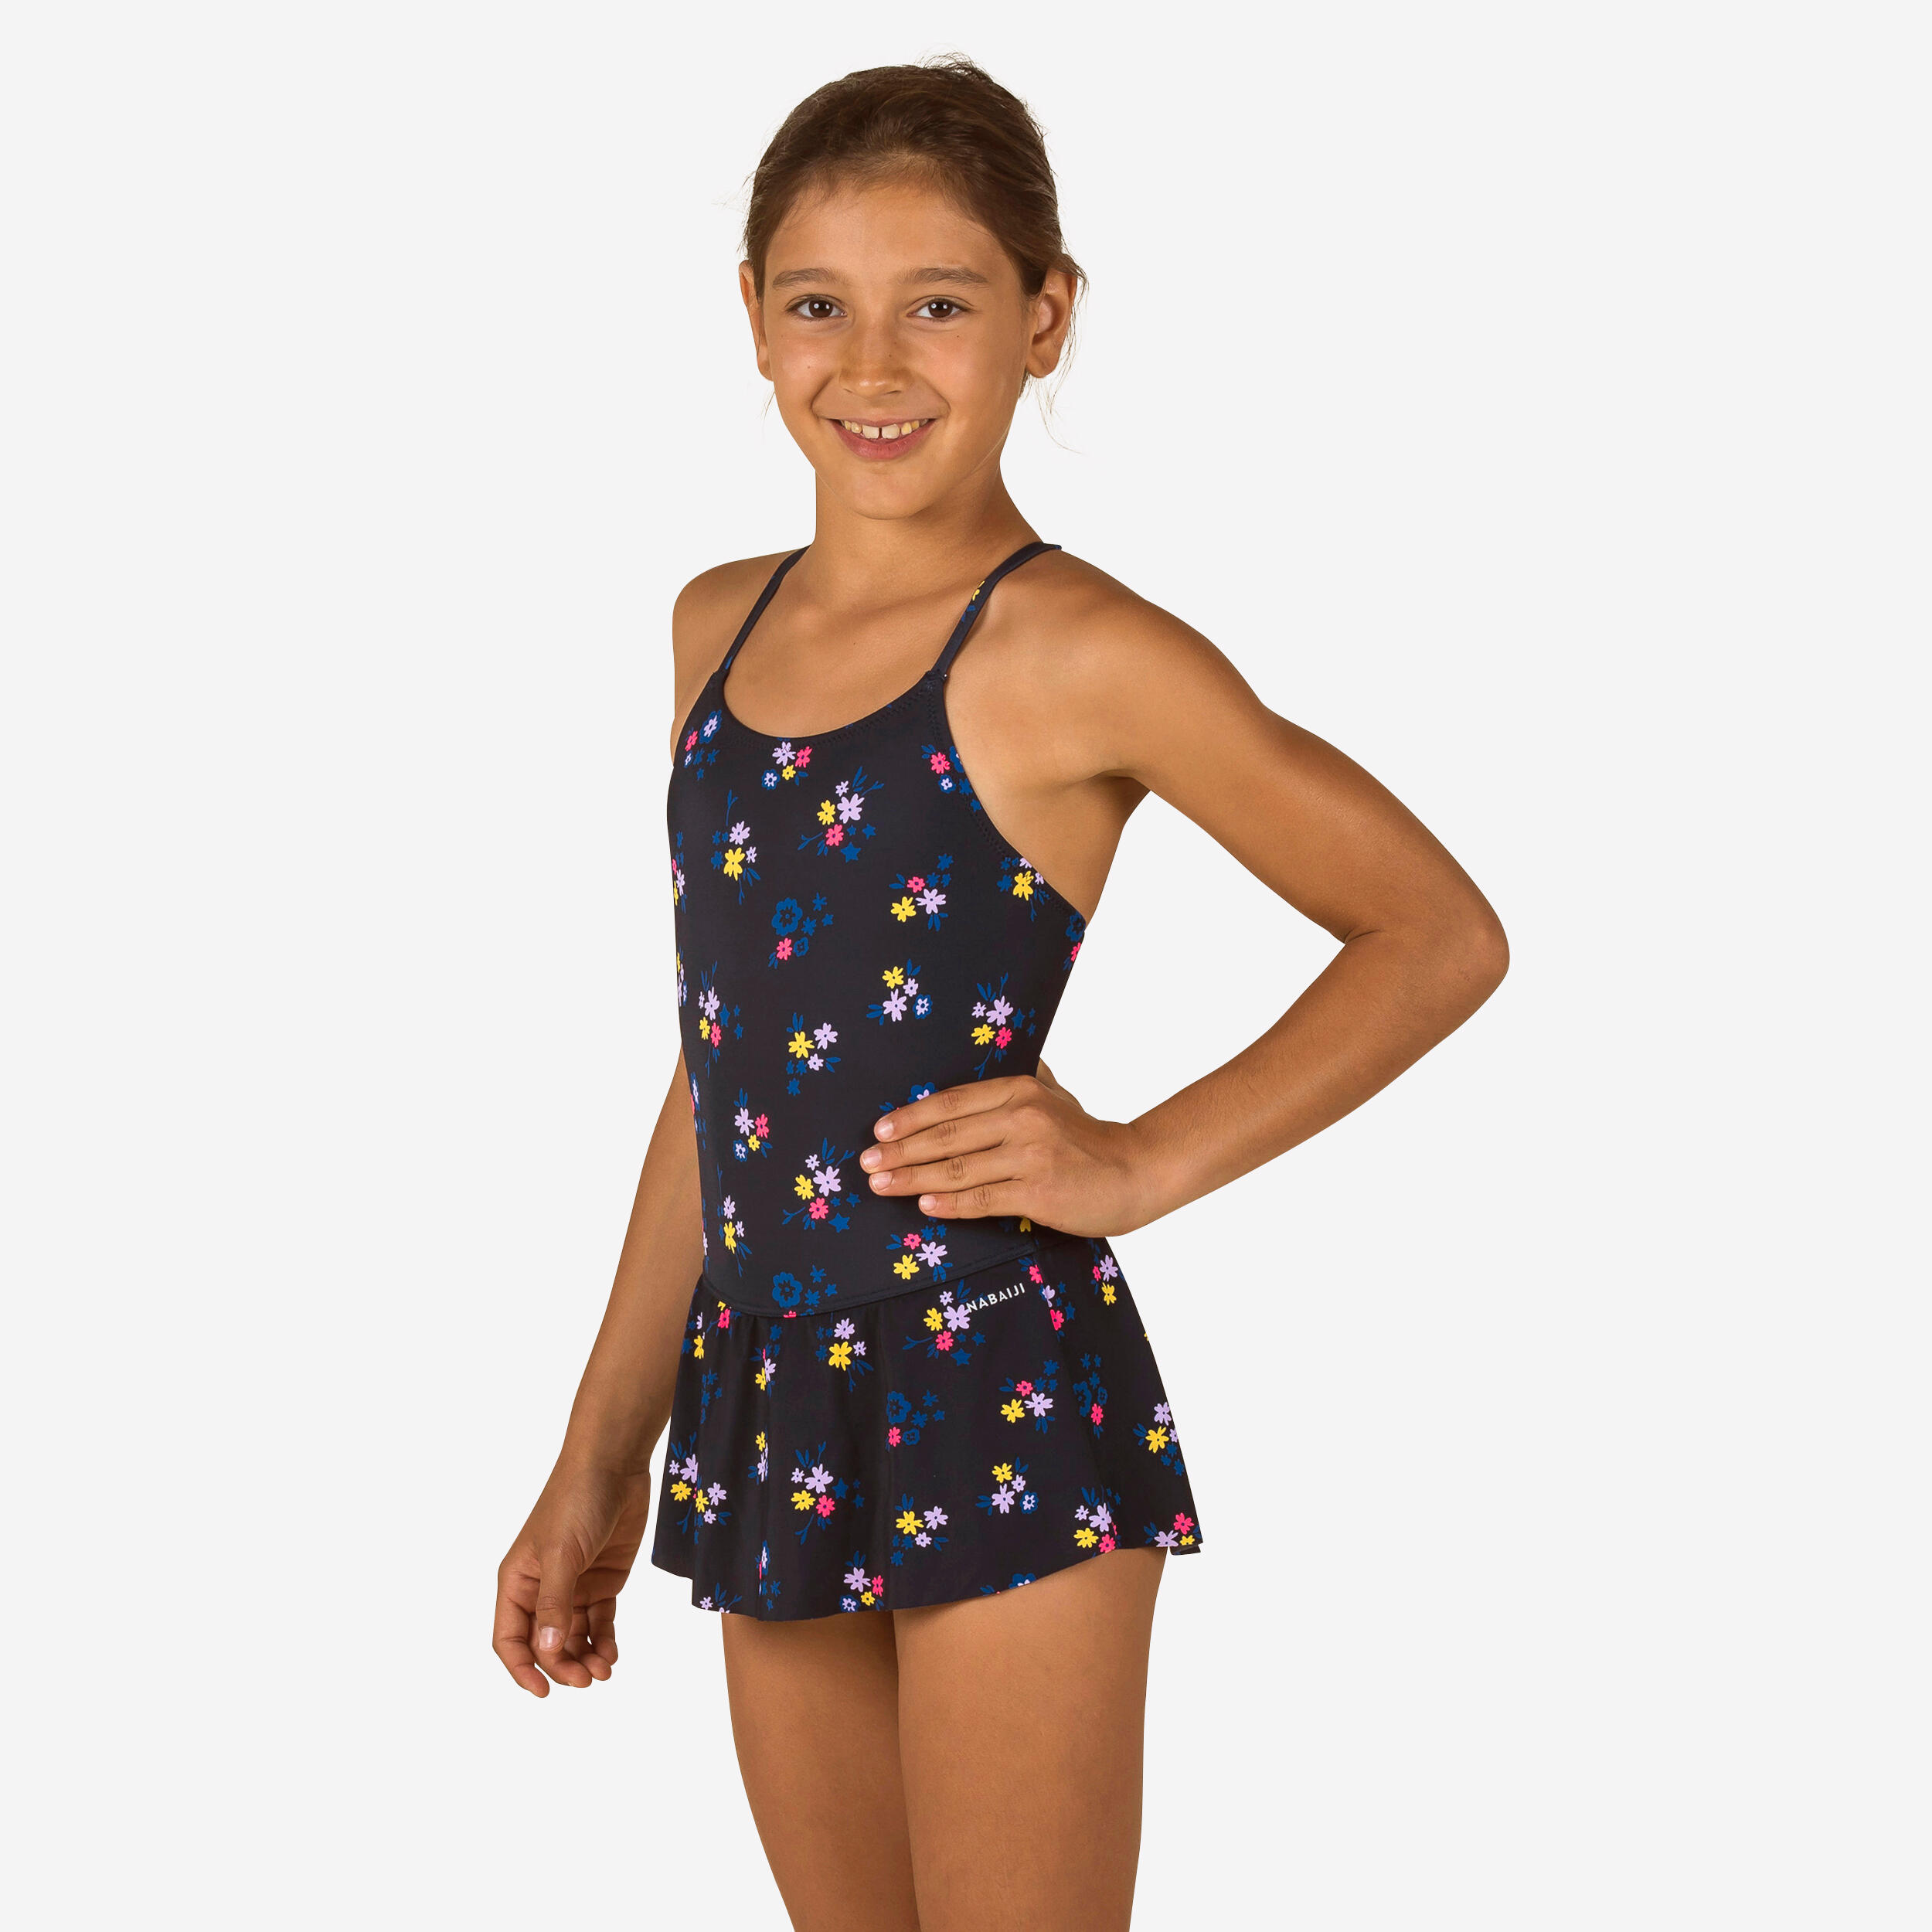 Lila Navy 100 Girls Swimming One-Piece Swimsuit/Skirt - Lily navy 1/4